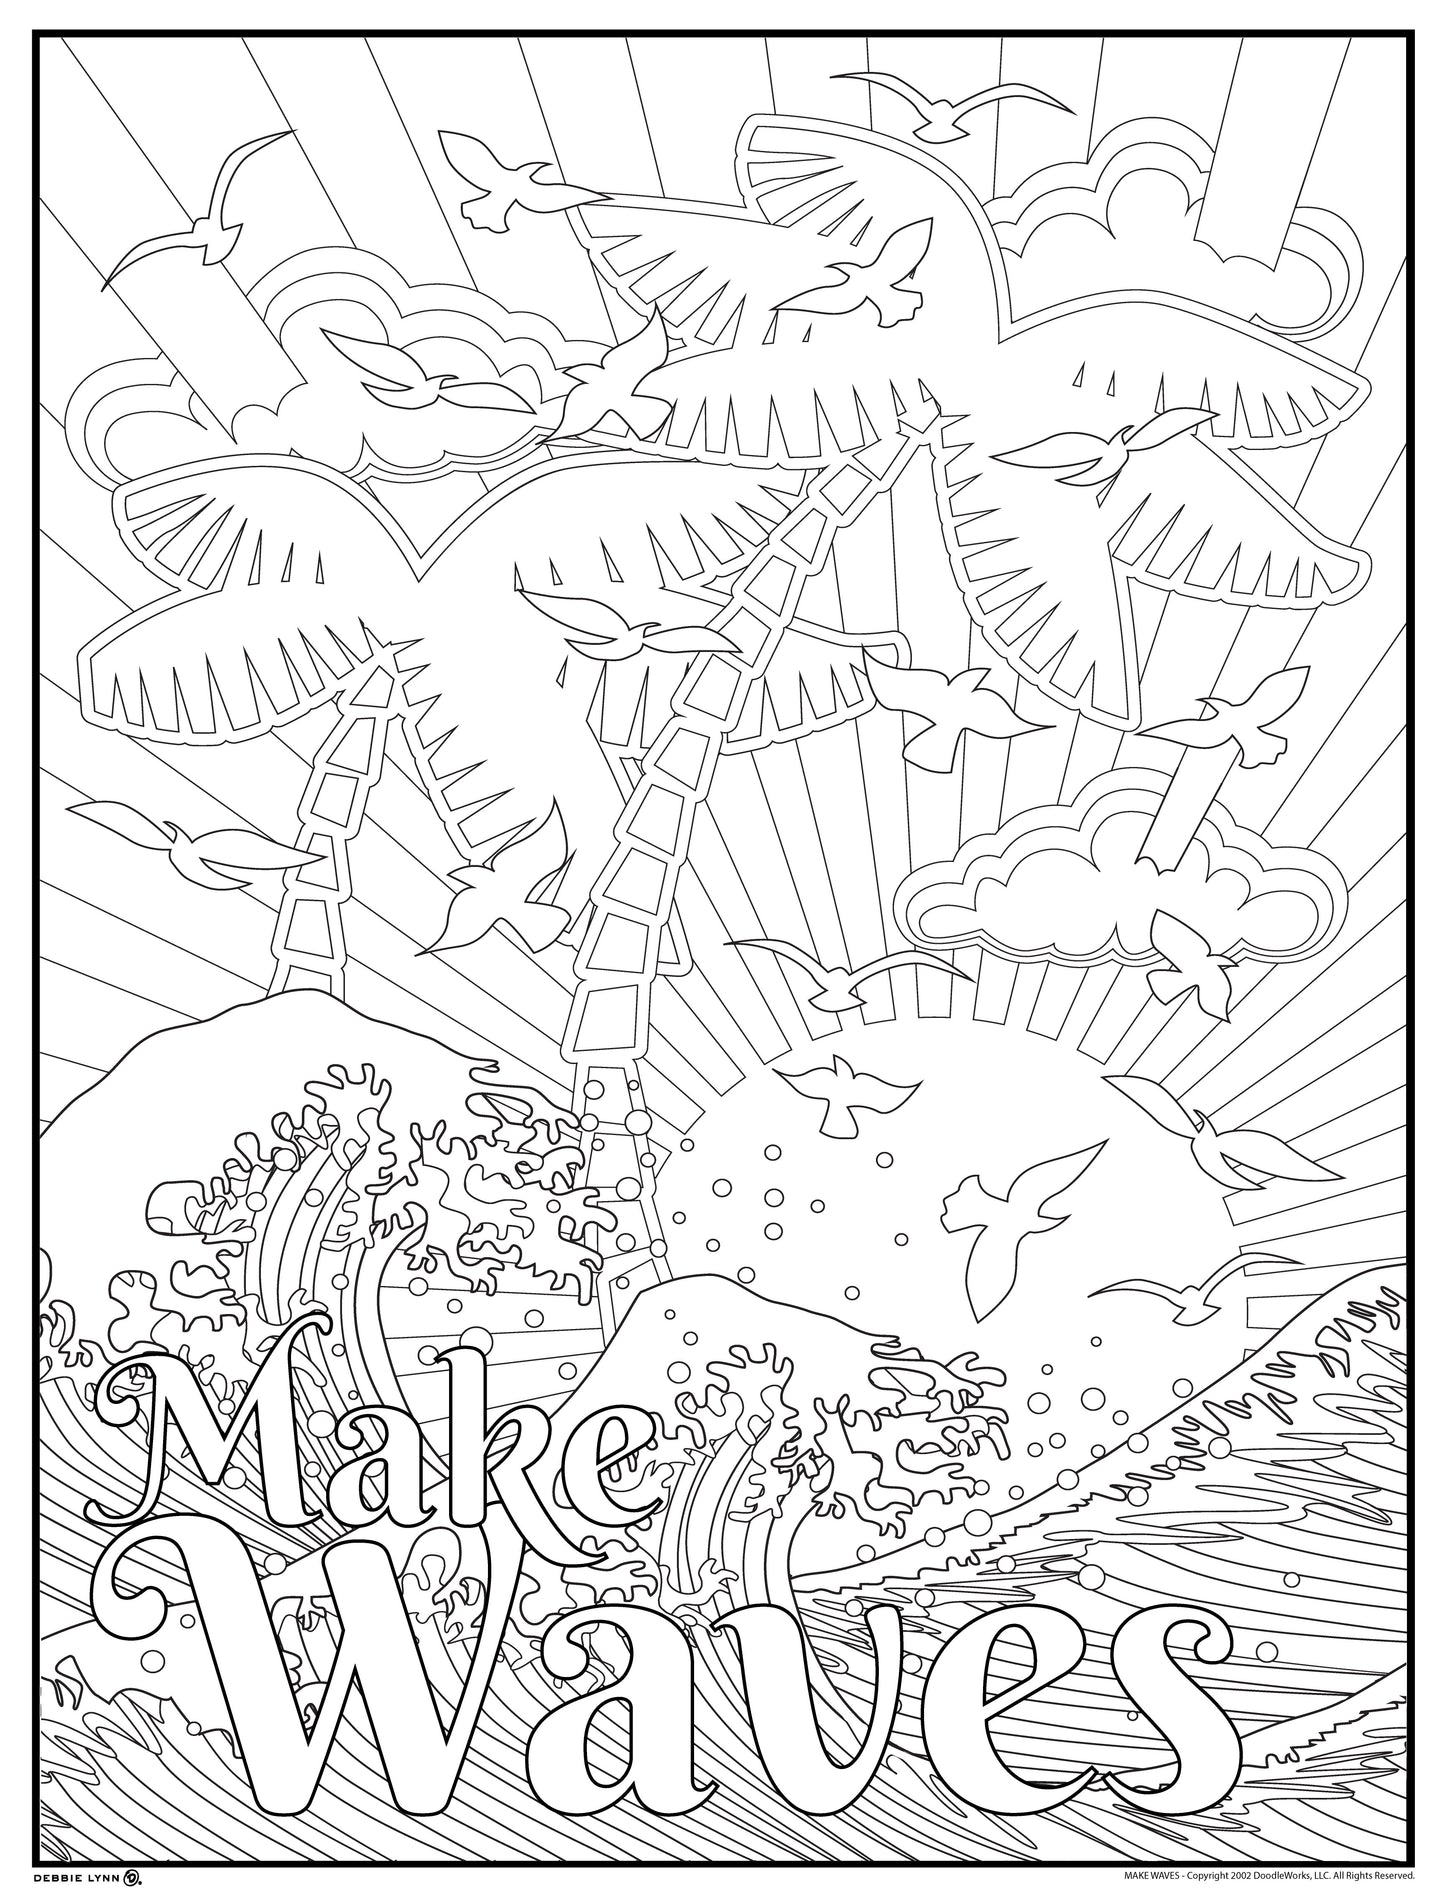 Make Waves Beach VBS FAITH Personalized Giant Coloring Poster 46"x60"